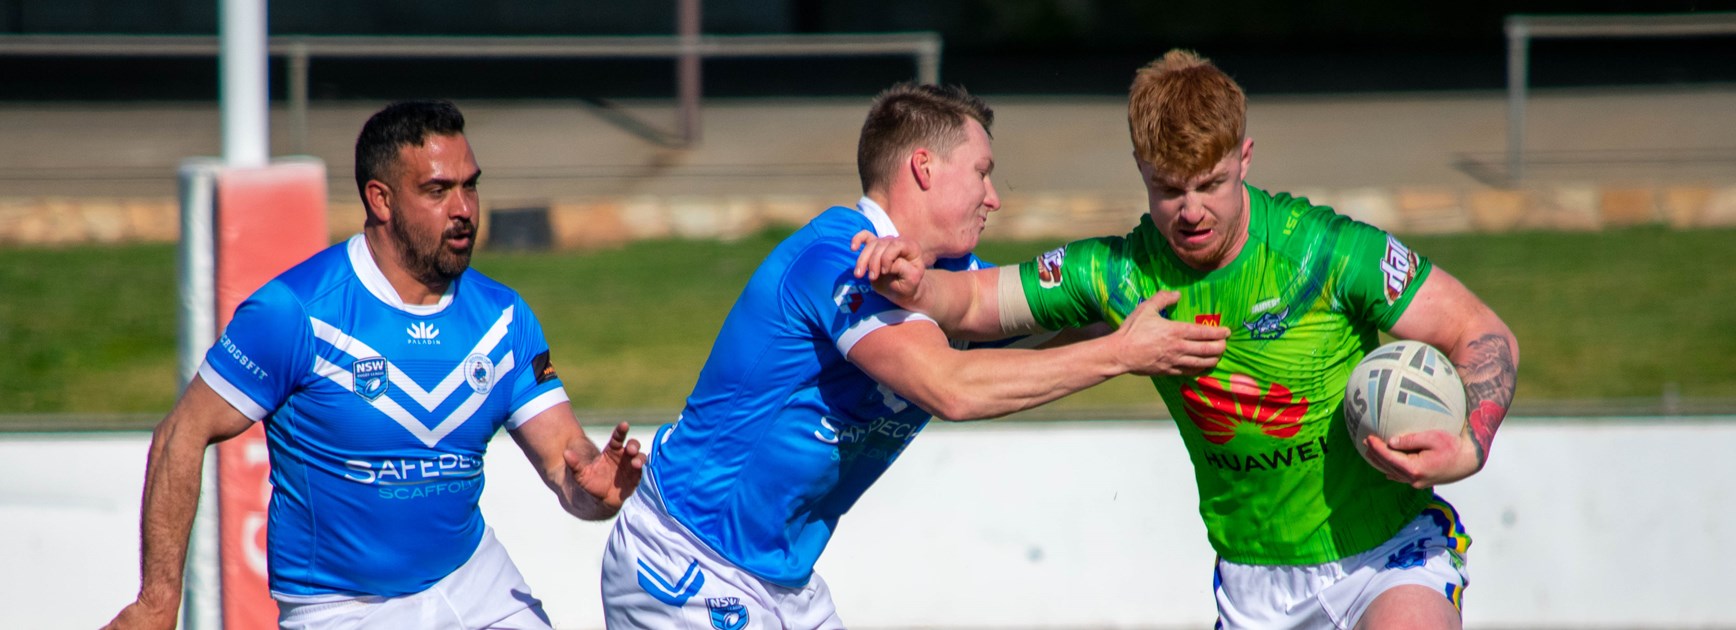 Raiders Under 20s too good for Blues